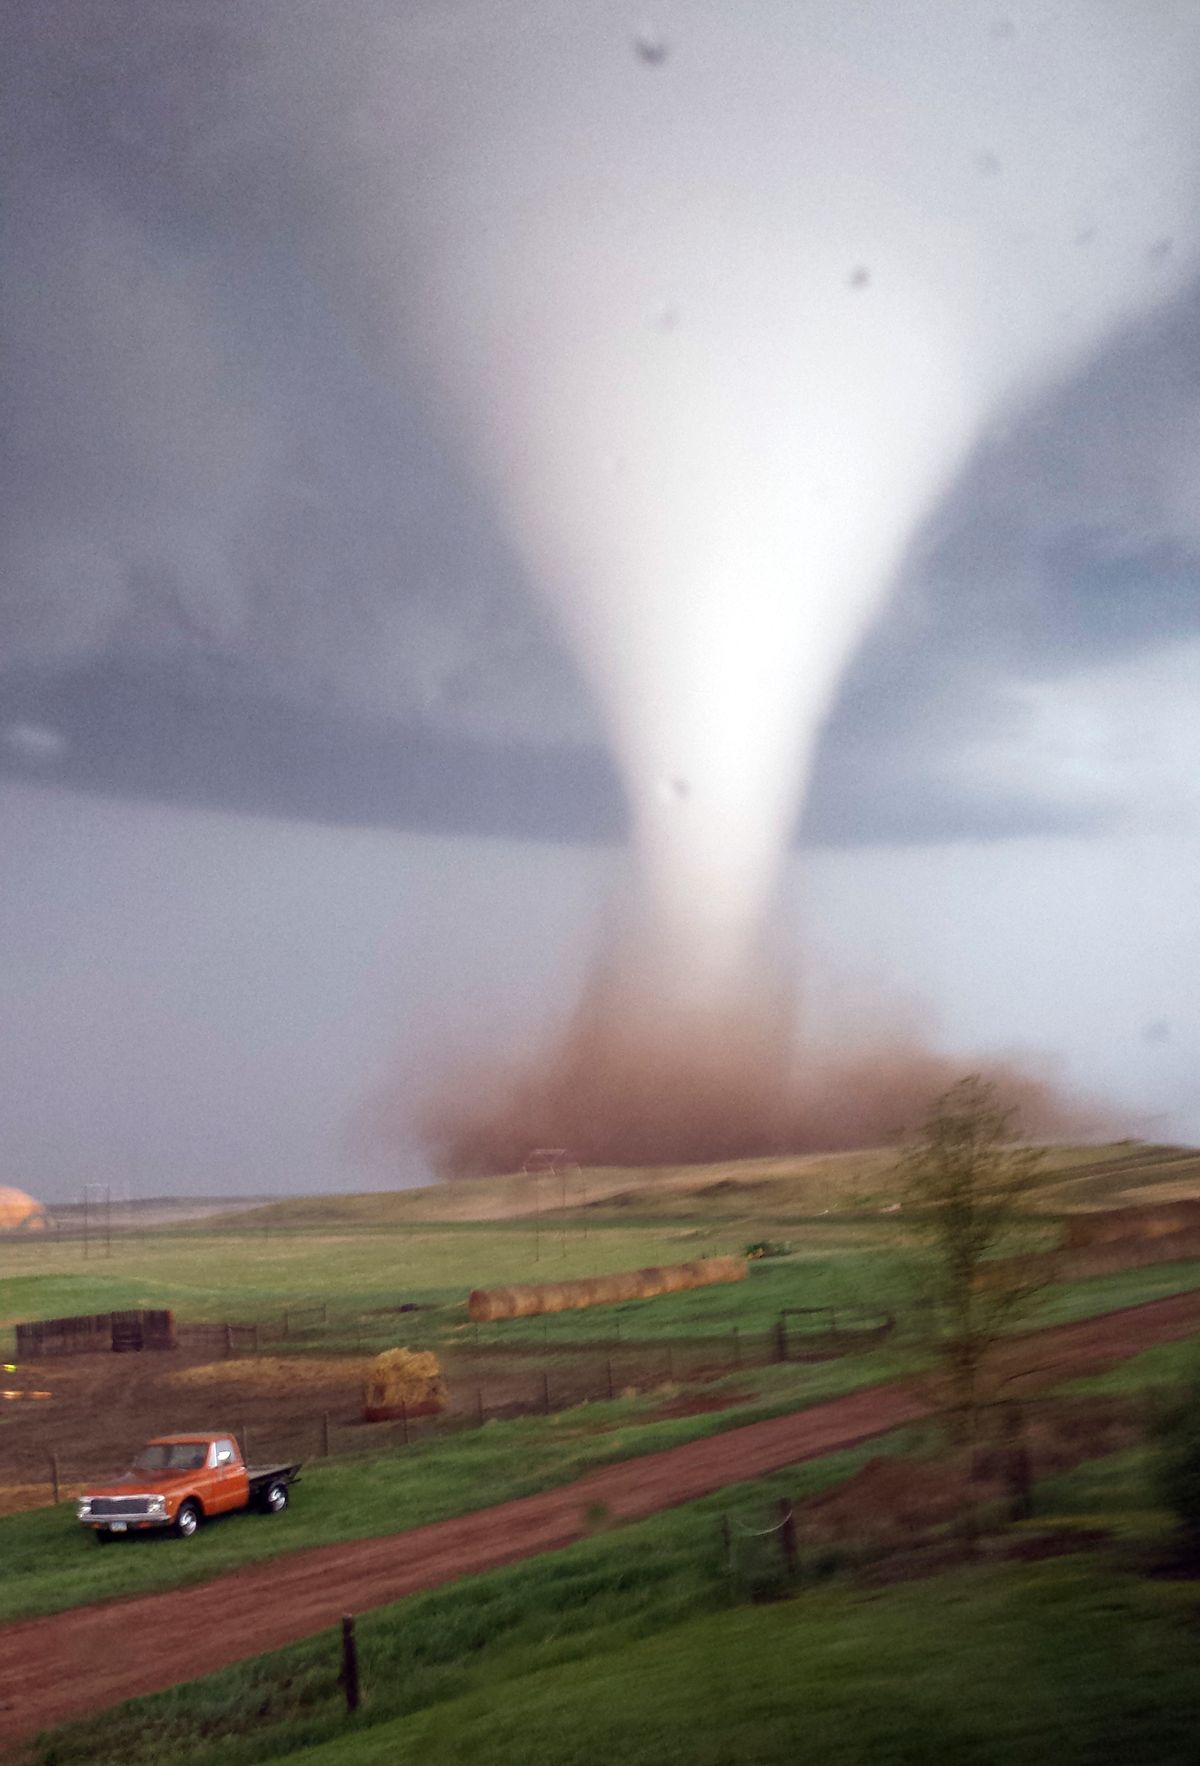 This photo taken on Monday, May 26, 2014 and provided by Jill Helmuth, shows a tornado touching down on a reach before heading towards Watford City, N.D. Authorities say several were injured and more than a dozen trailers were damaged or destroyed Monday evening when the twister tore through a camp where oil field workers stay. (AP Photo/Jill Helmuth) (AP)